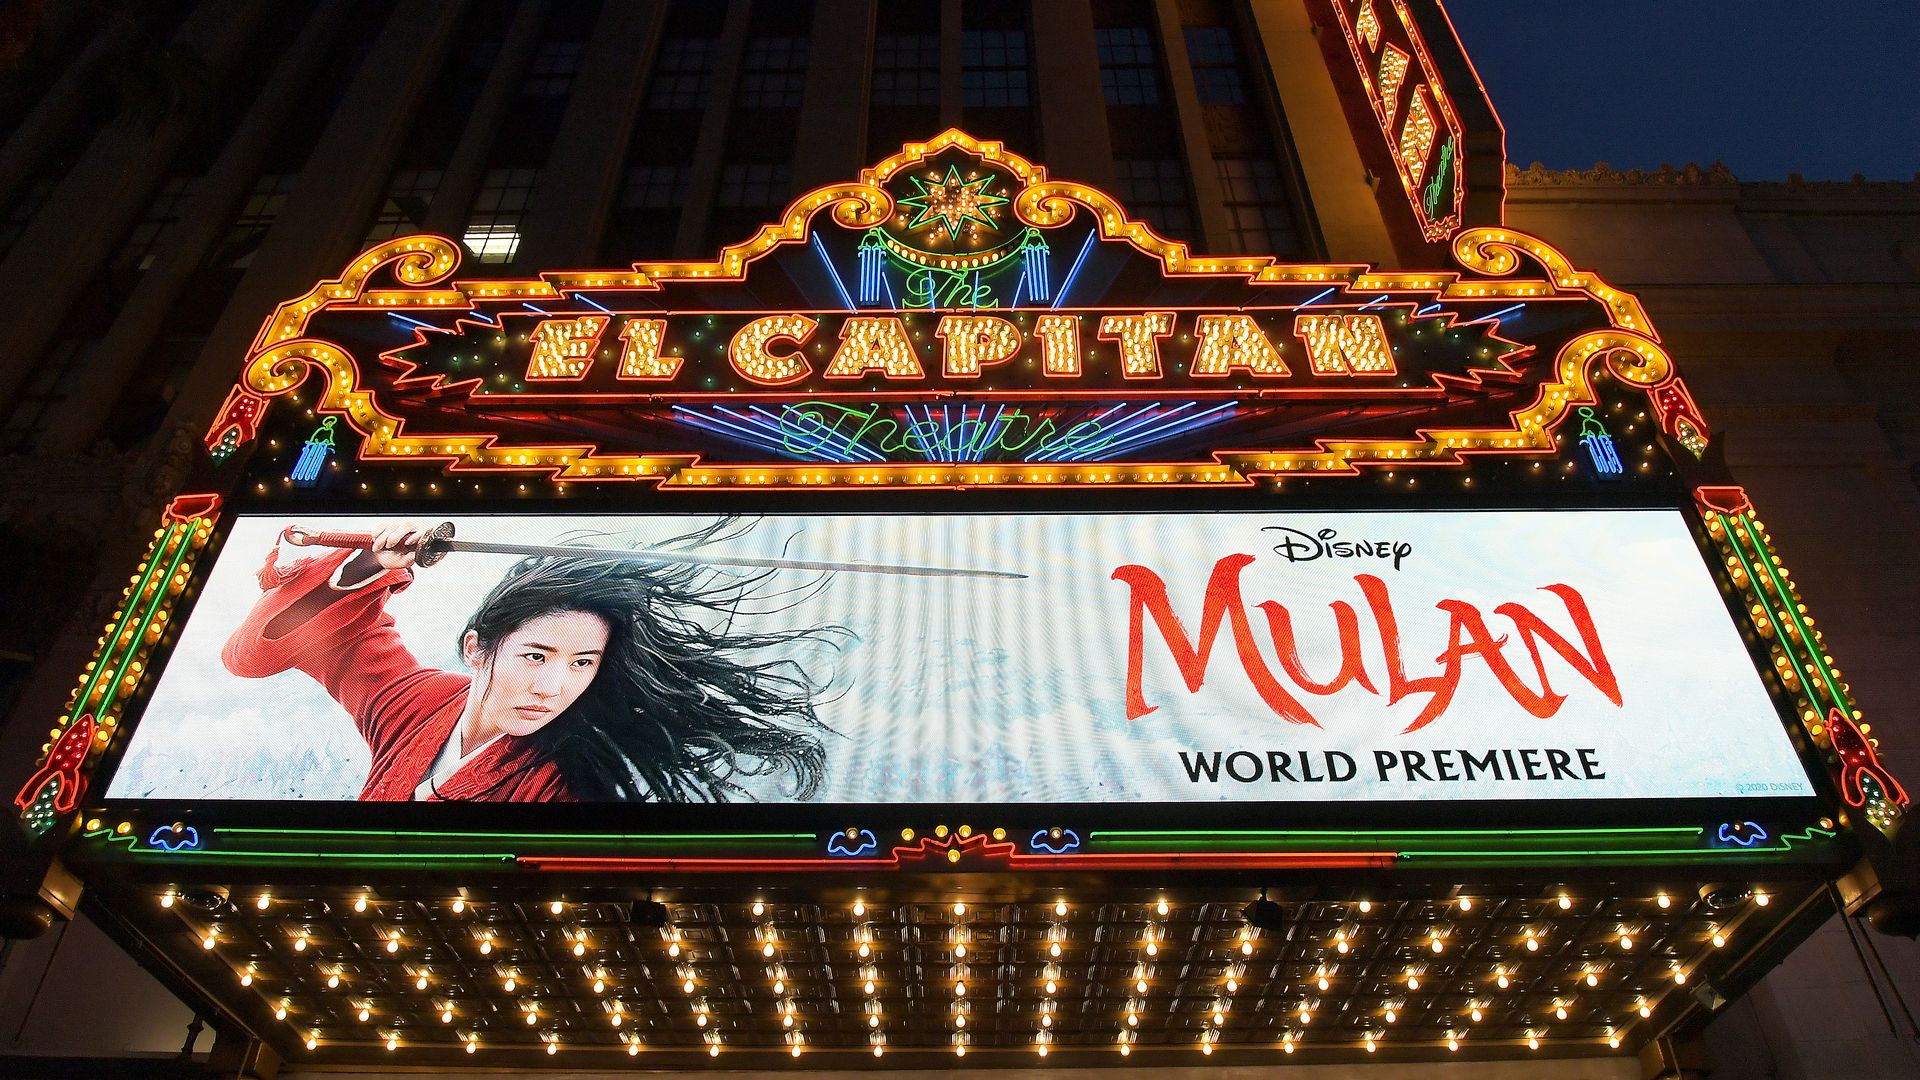  The World Premiere of Disney's 'MULAN' at the Dolby Theatre on March 09, 2020 in Hollywood, California.